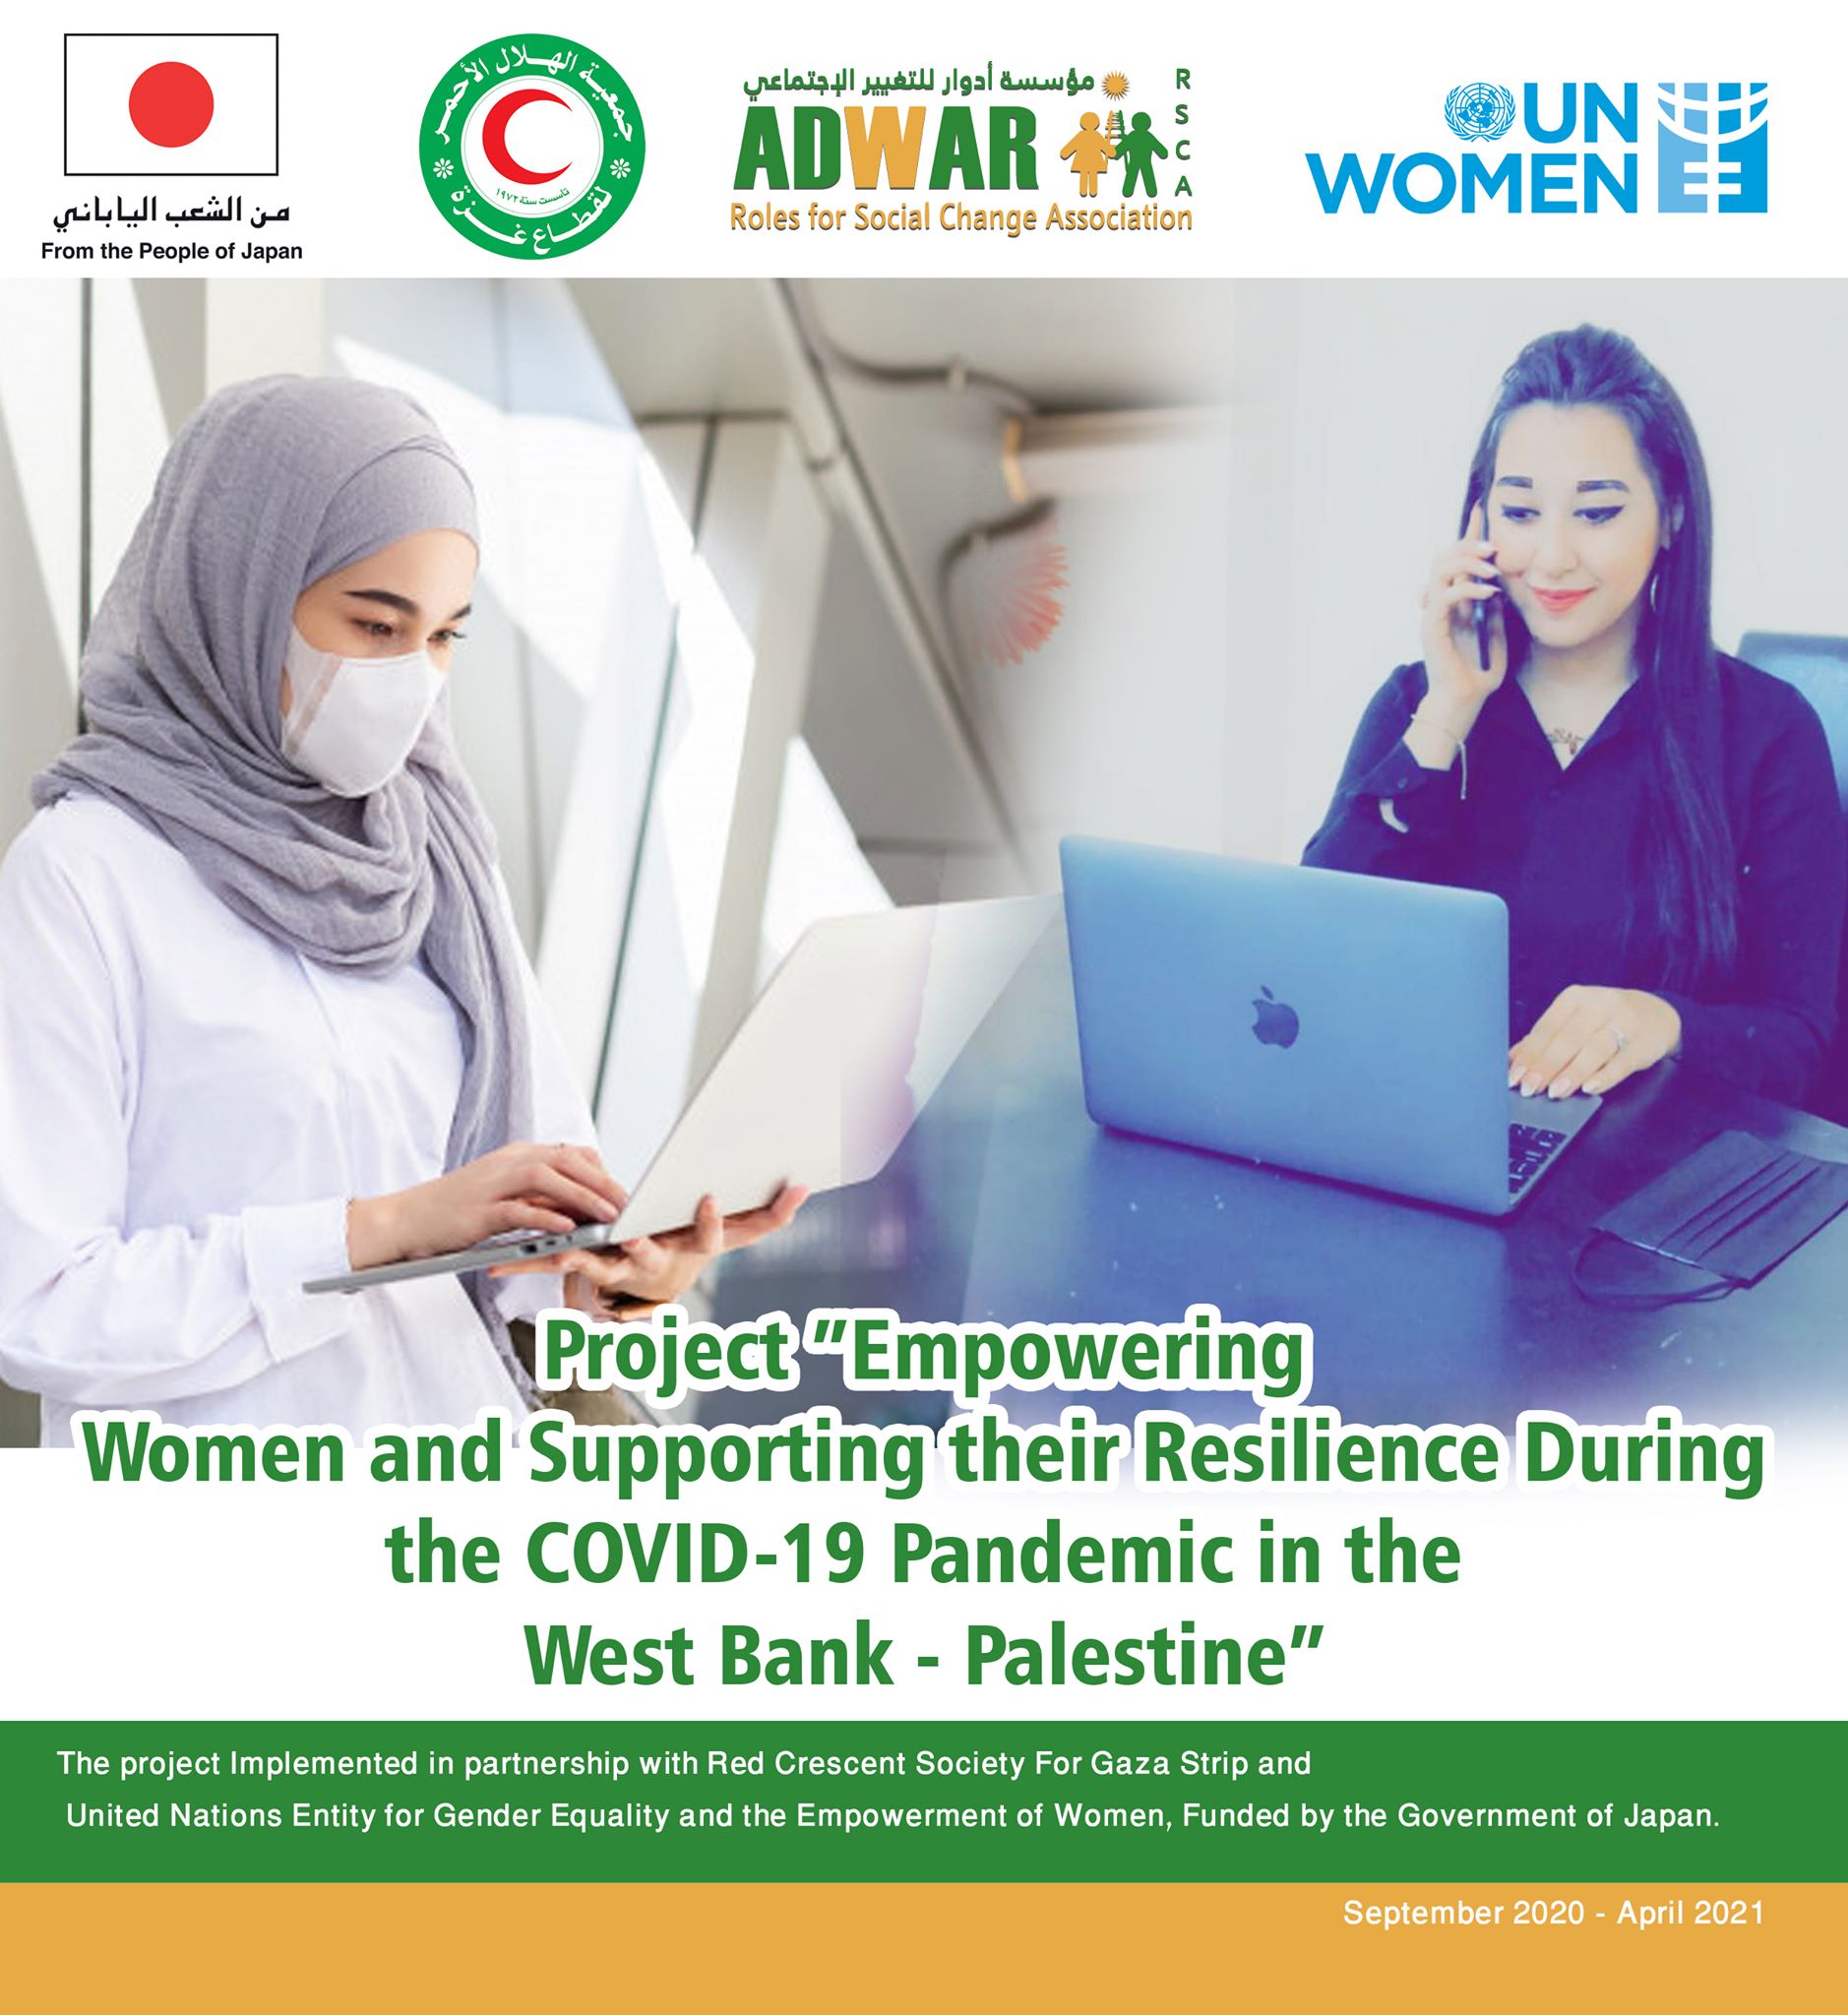  Project Empowering Women and Supporting their Resilience During the COVID-19 Pandemic in the West Bank – Palestine